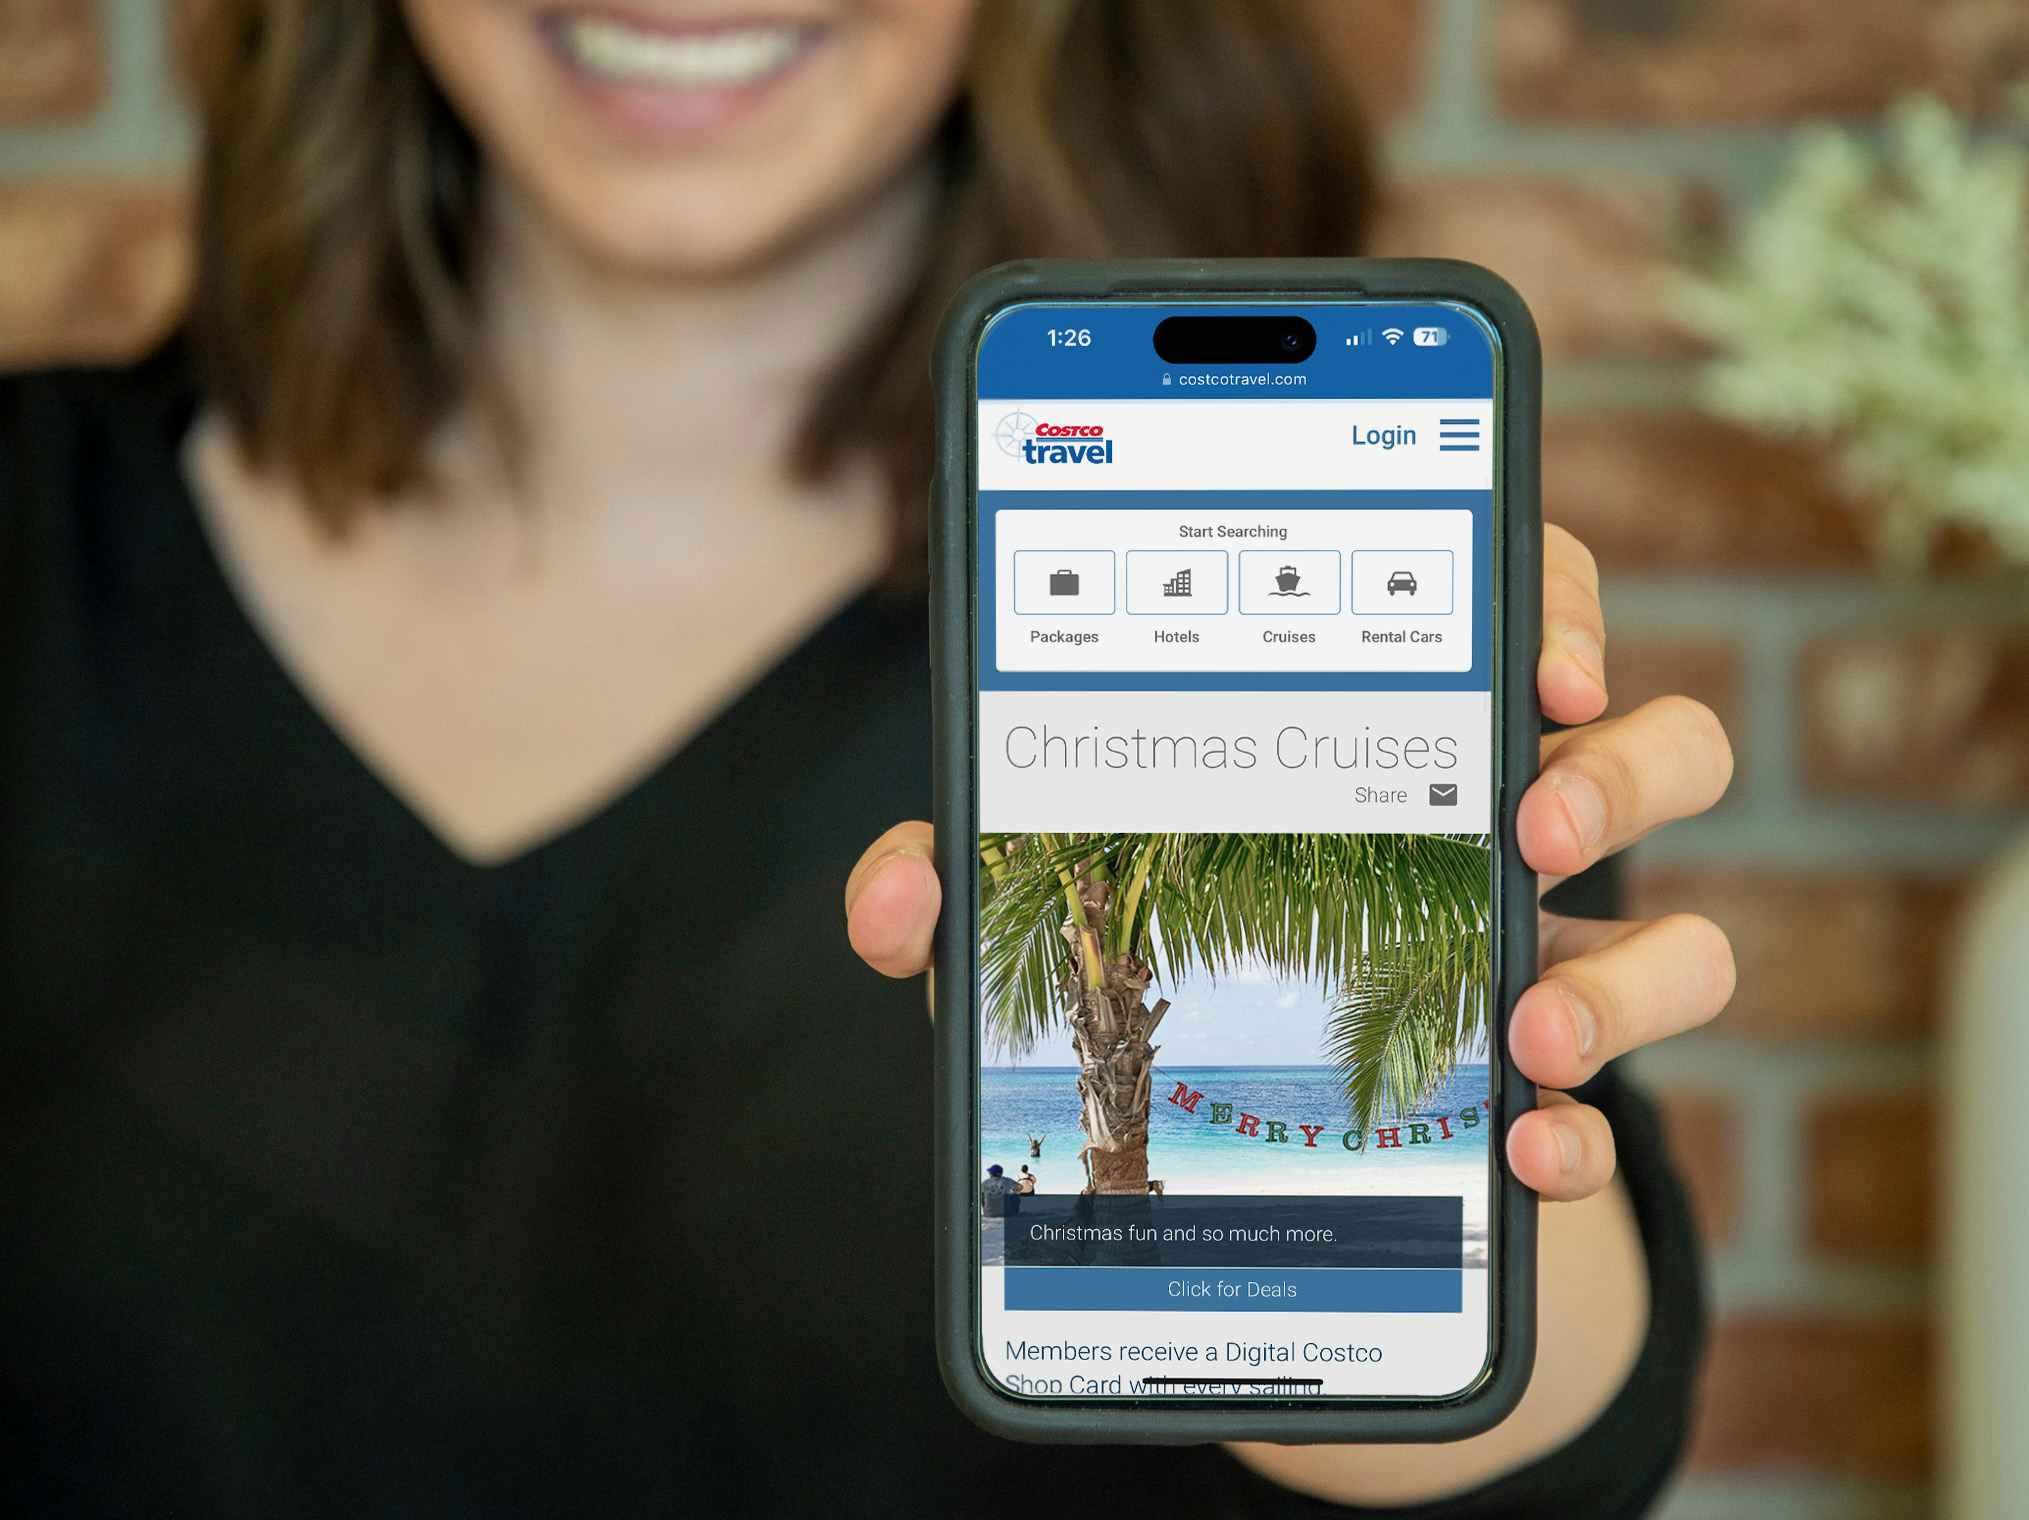 Someone holding up a phone displaying the Costco website's page about their Christmas cruises